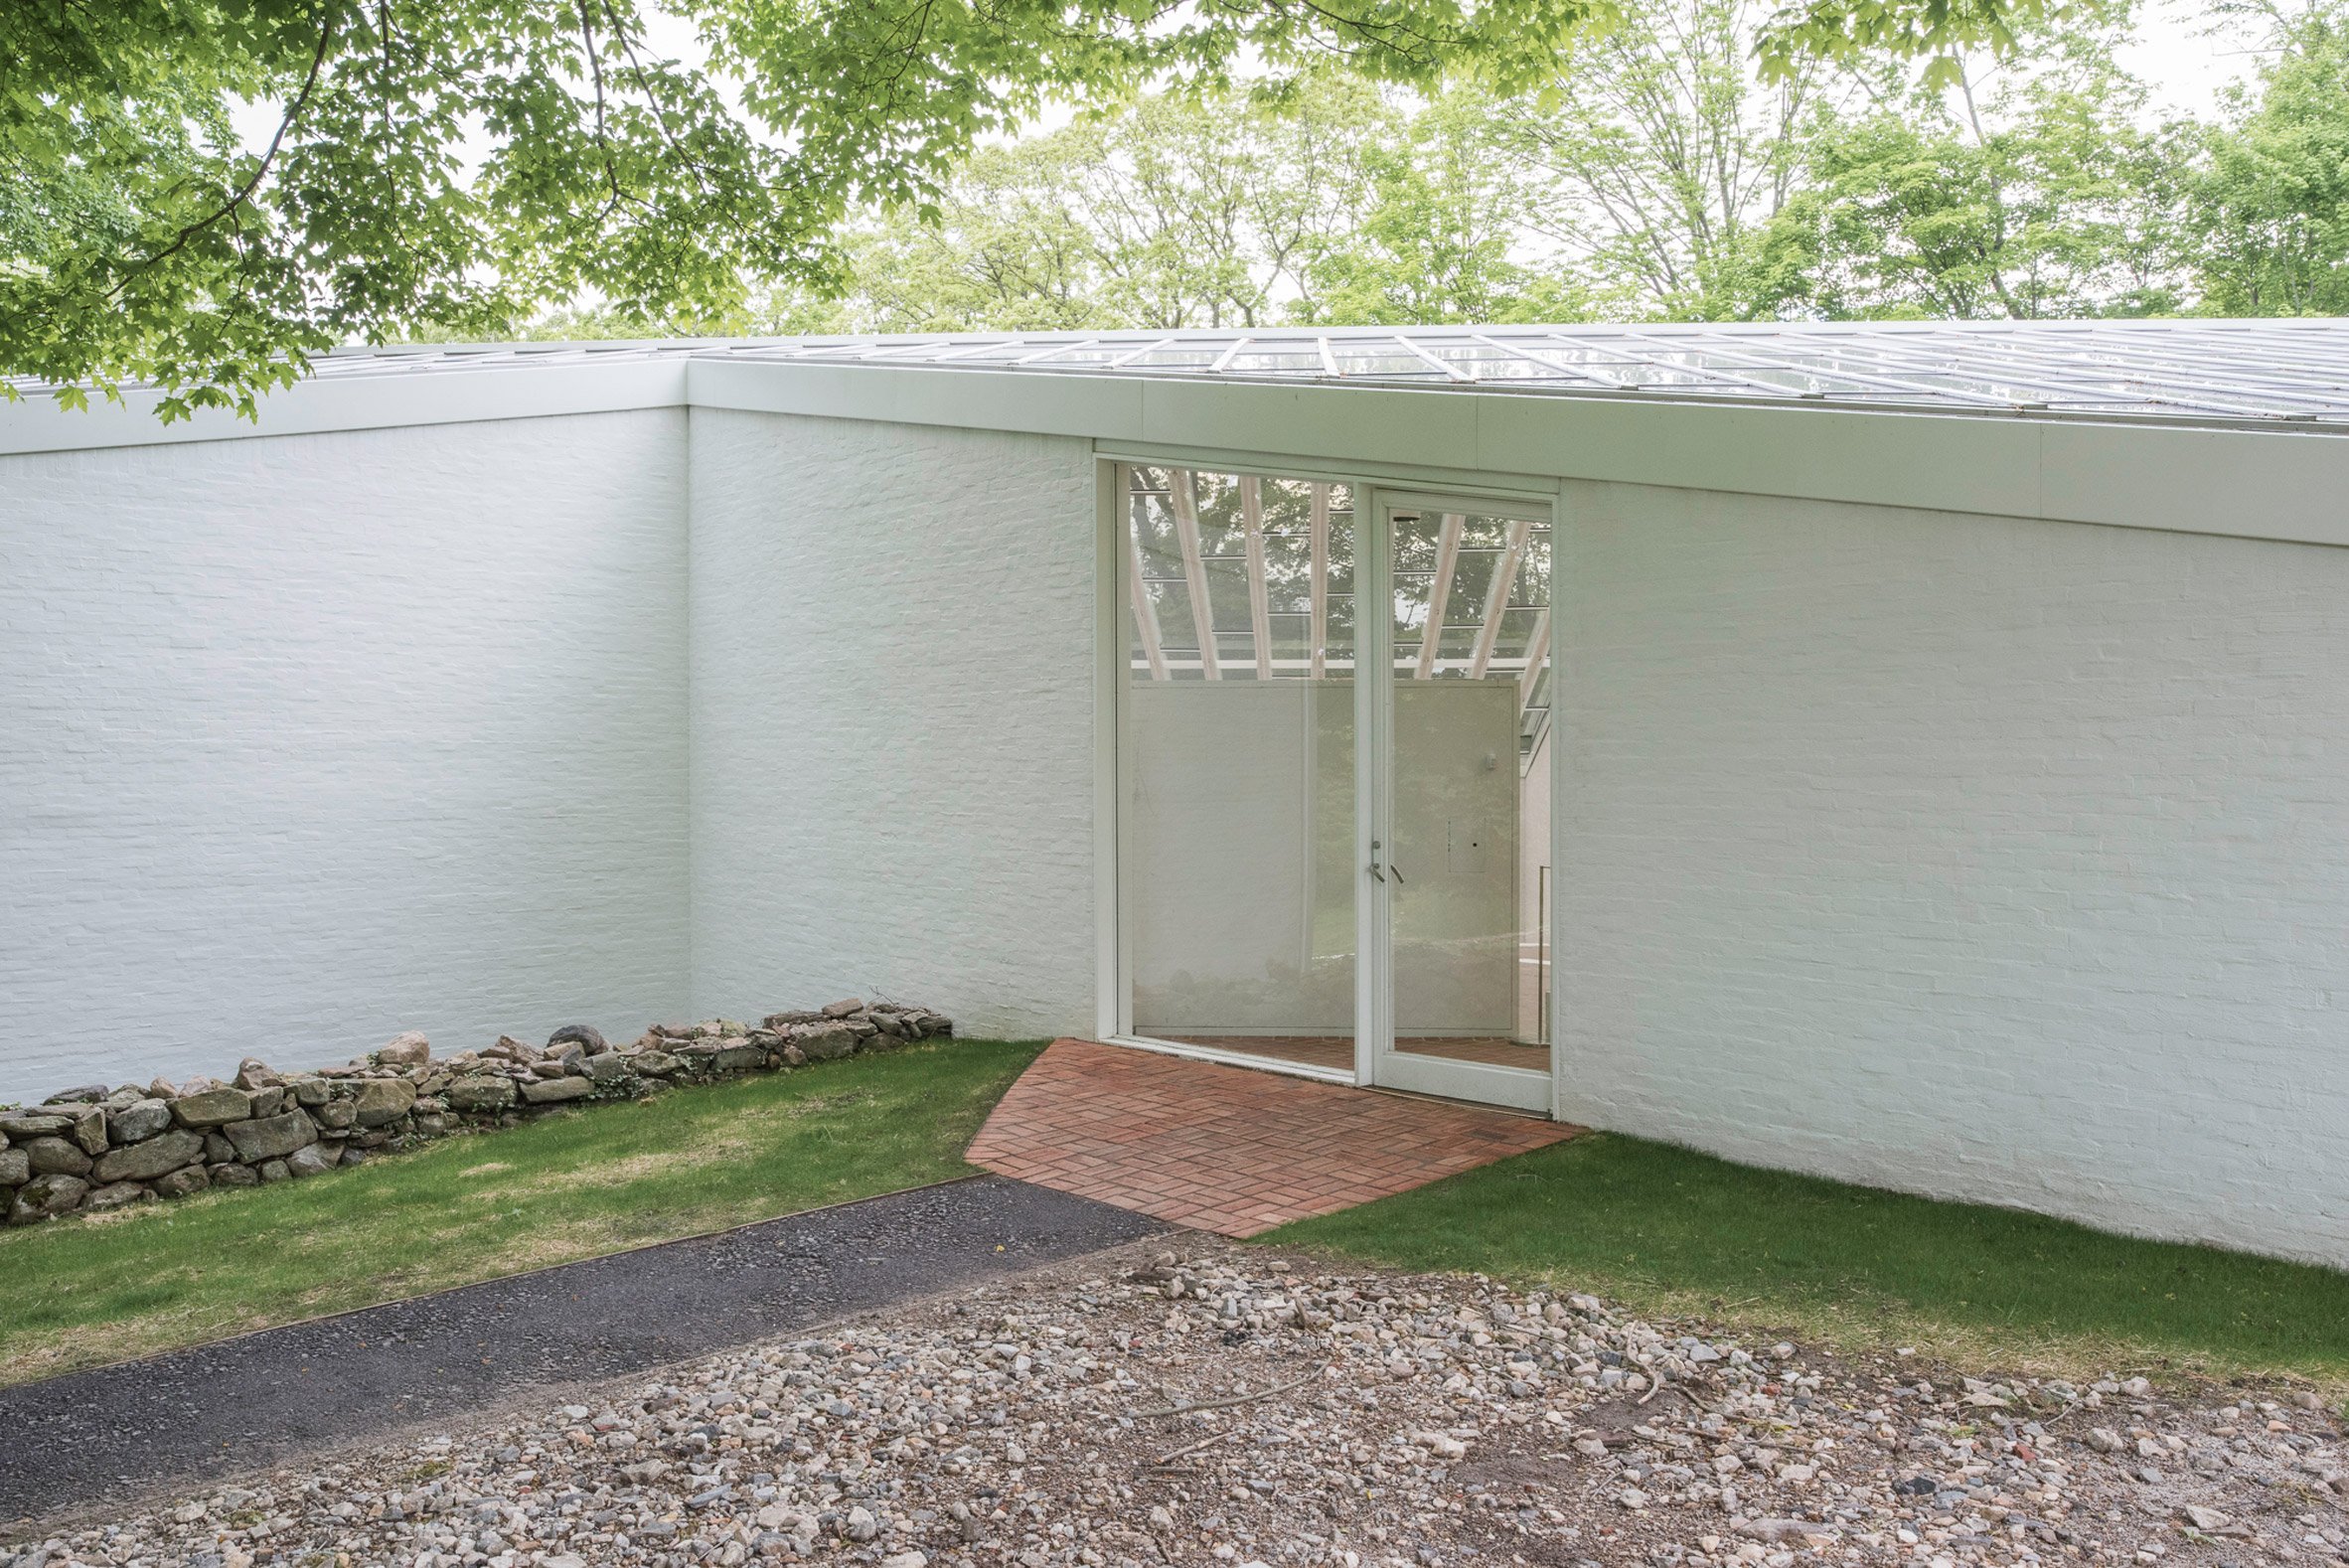 Restoration of the sculpture gallery at Philip Johnson's Glass House